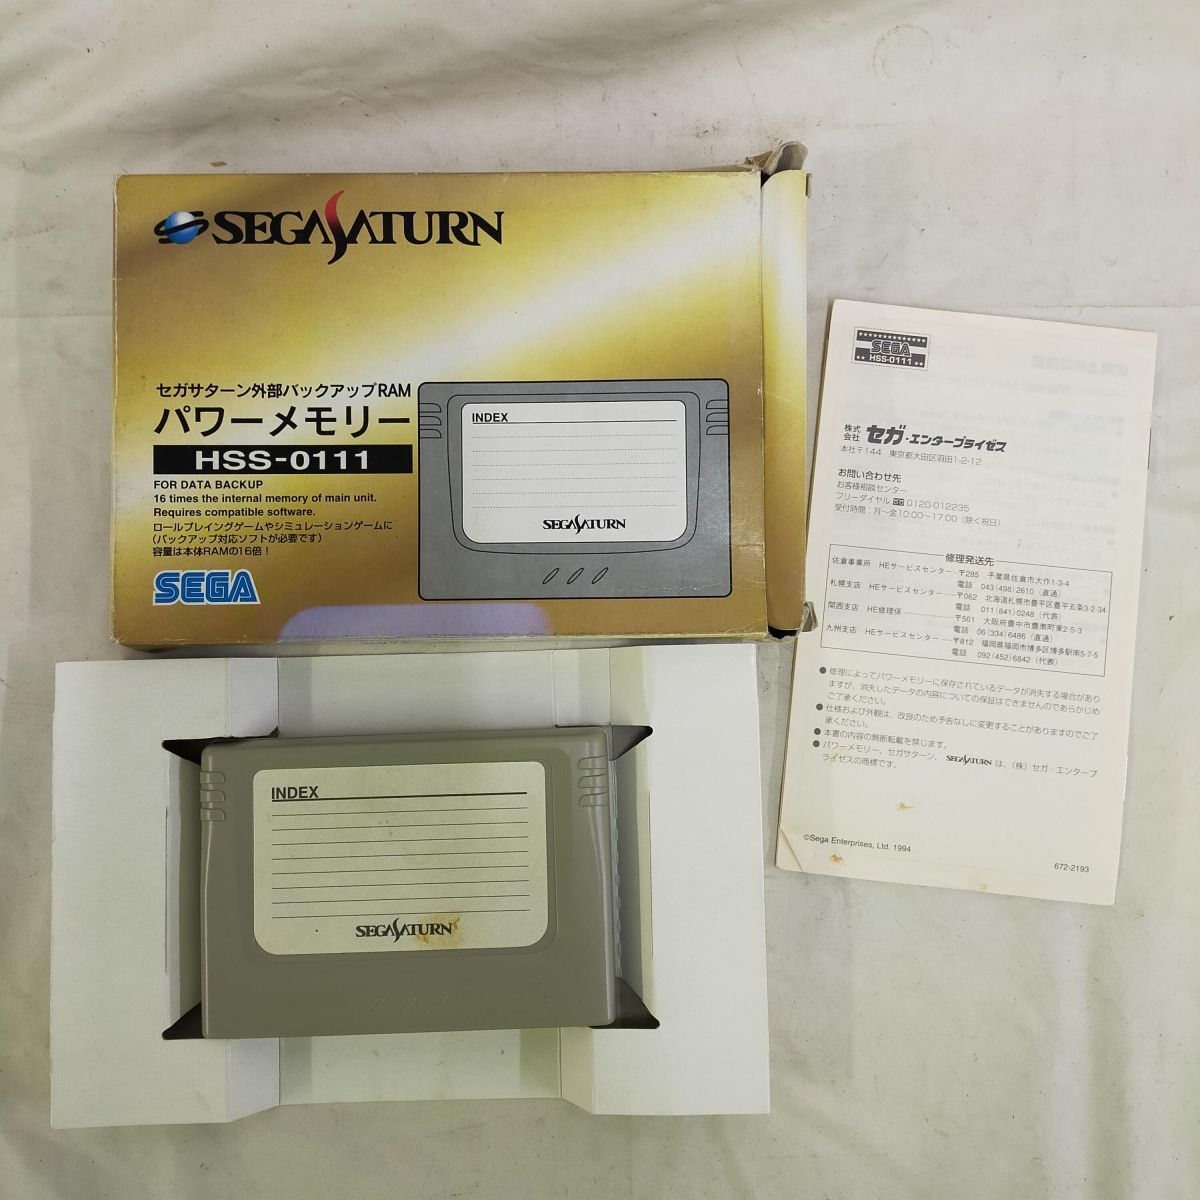 AC_11A_0217_4974365001117 サターン パワーメモリー[PHYSICAL_VIDEO_GAME_SOFTWARE]_画像1